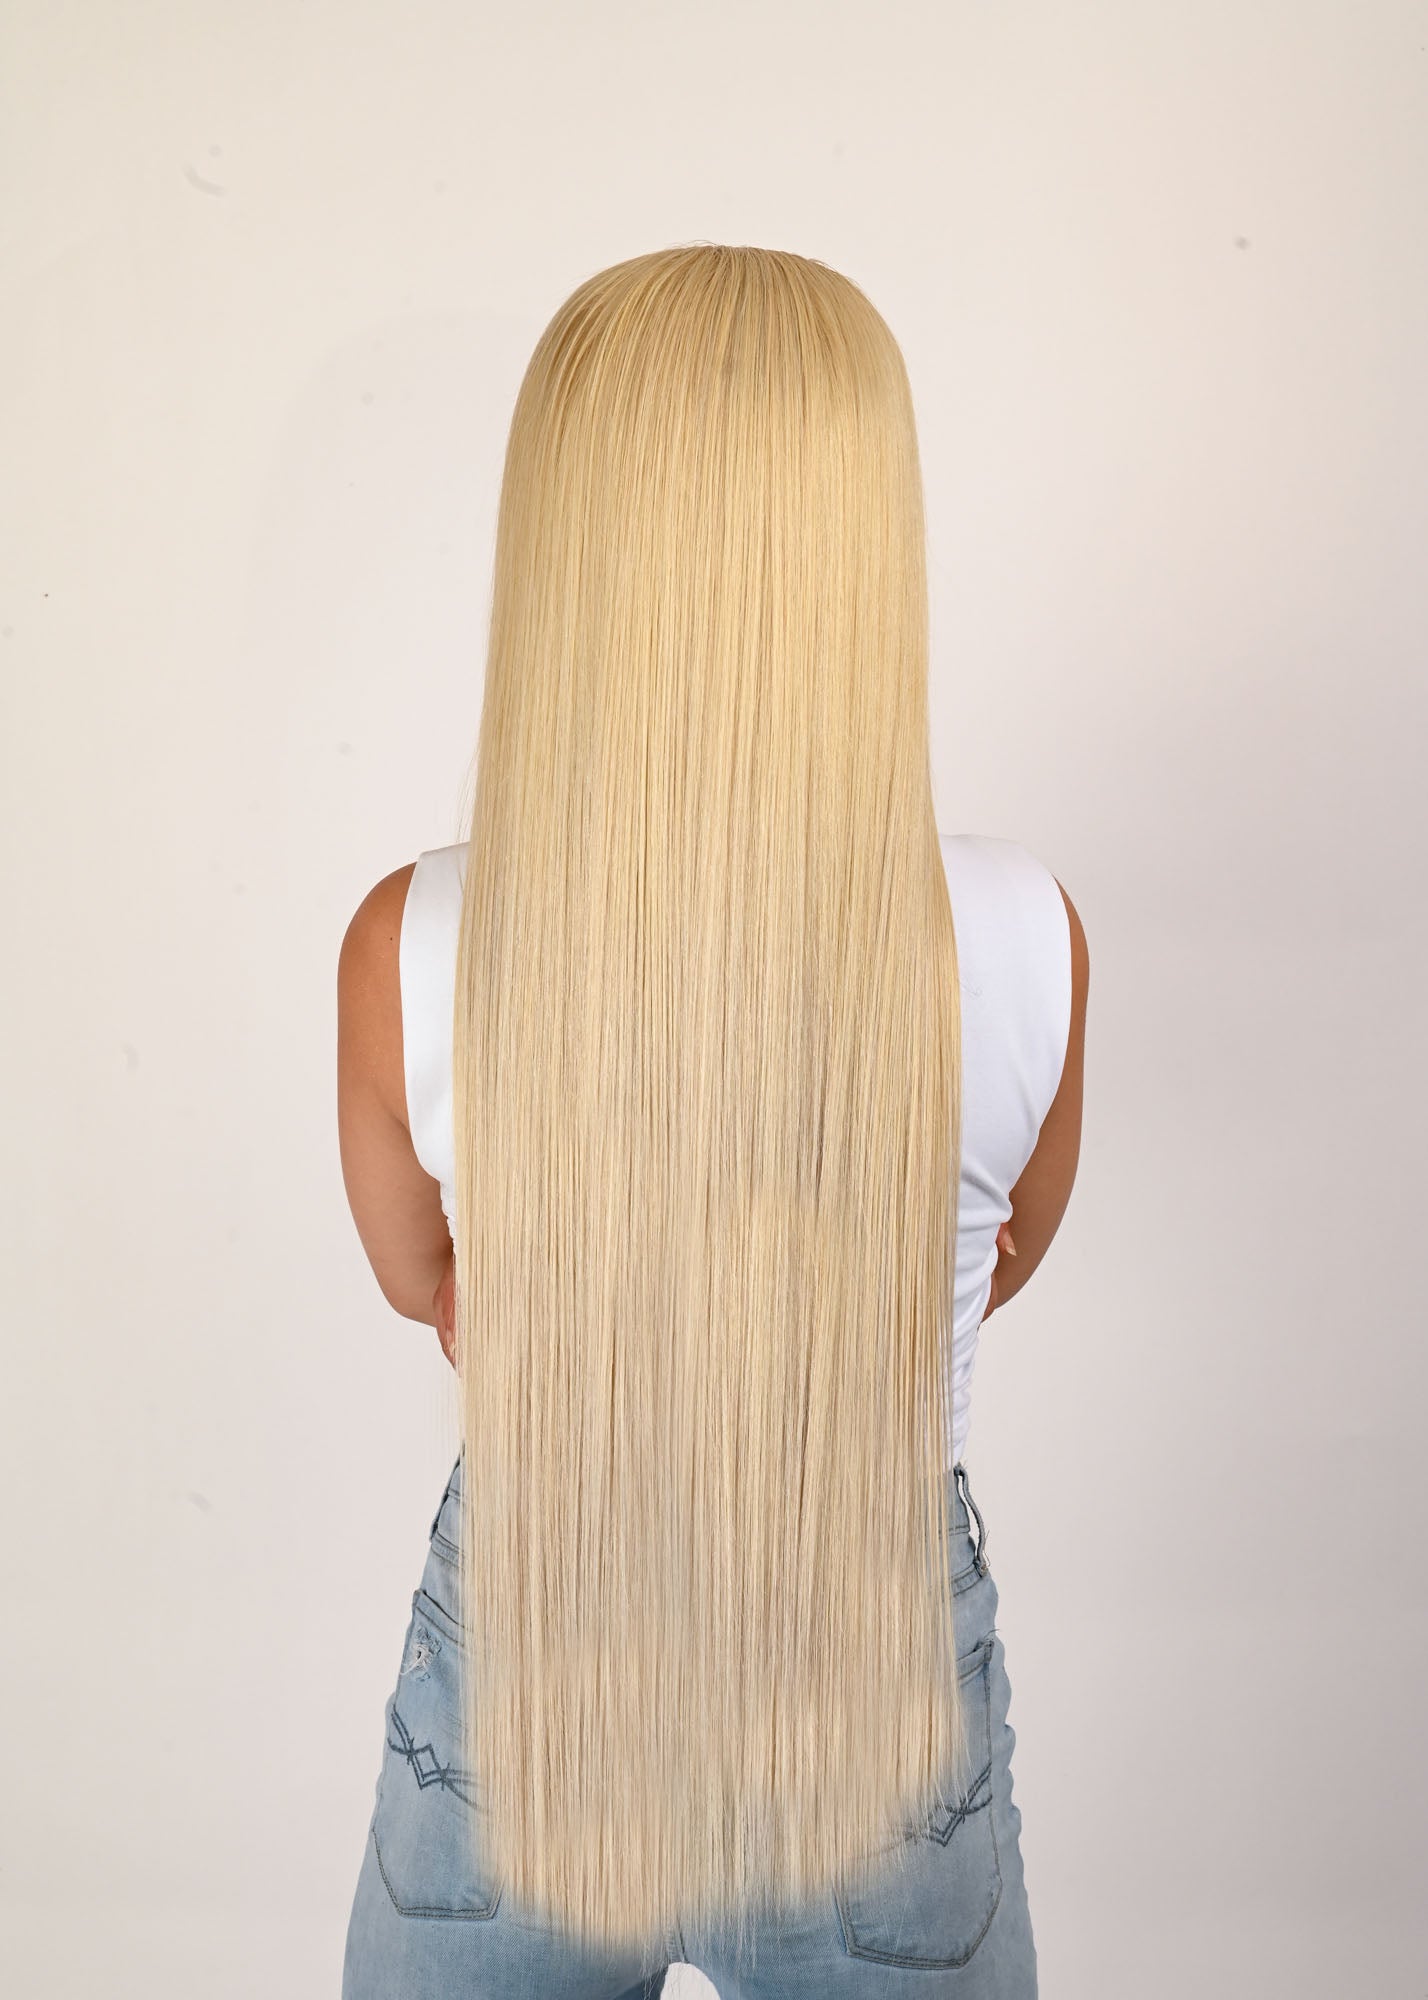 Raw 613 Blonde Straight Indian Hair Extension